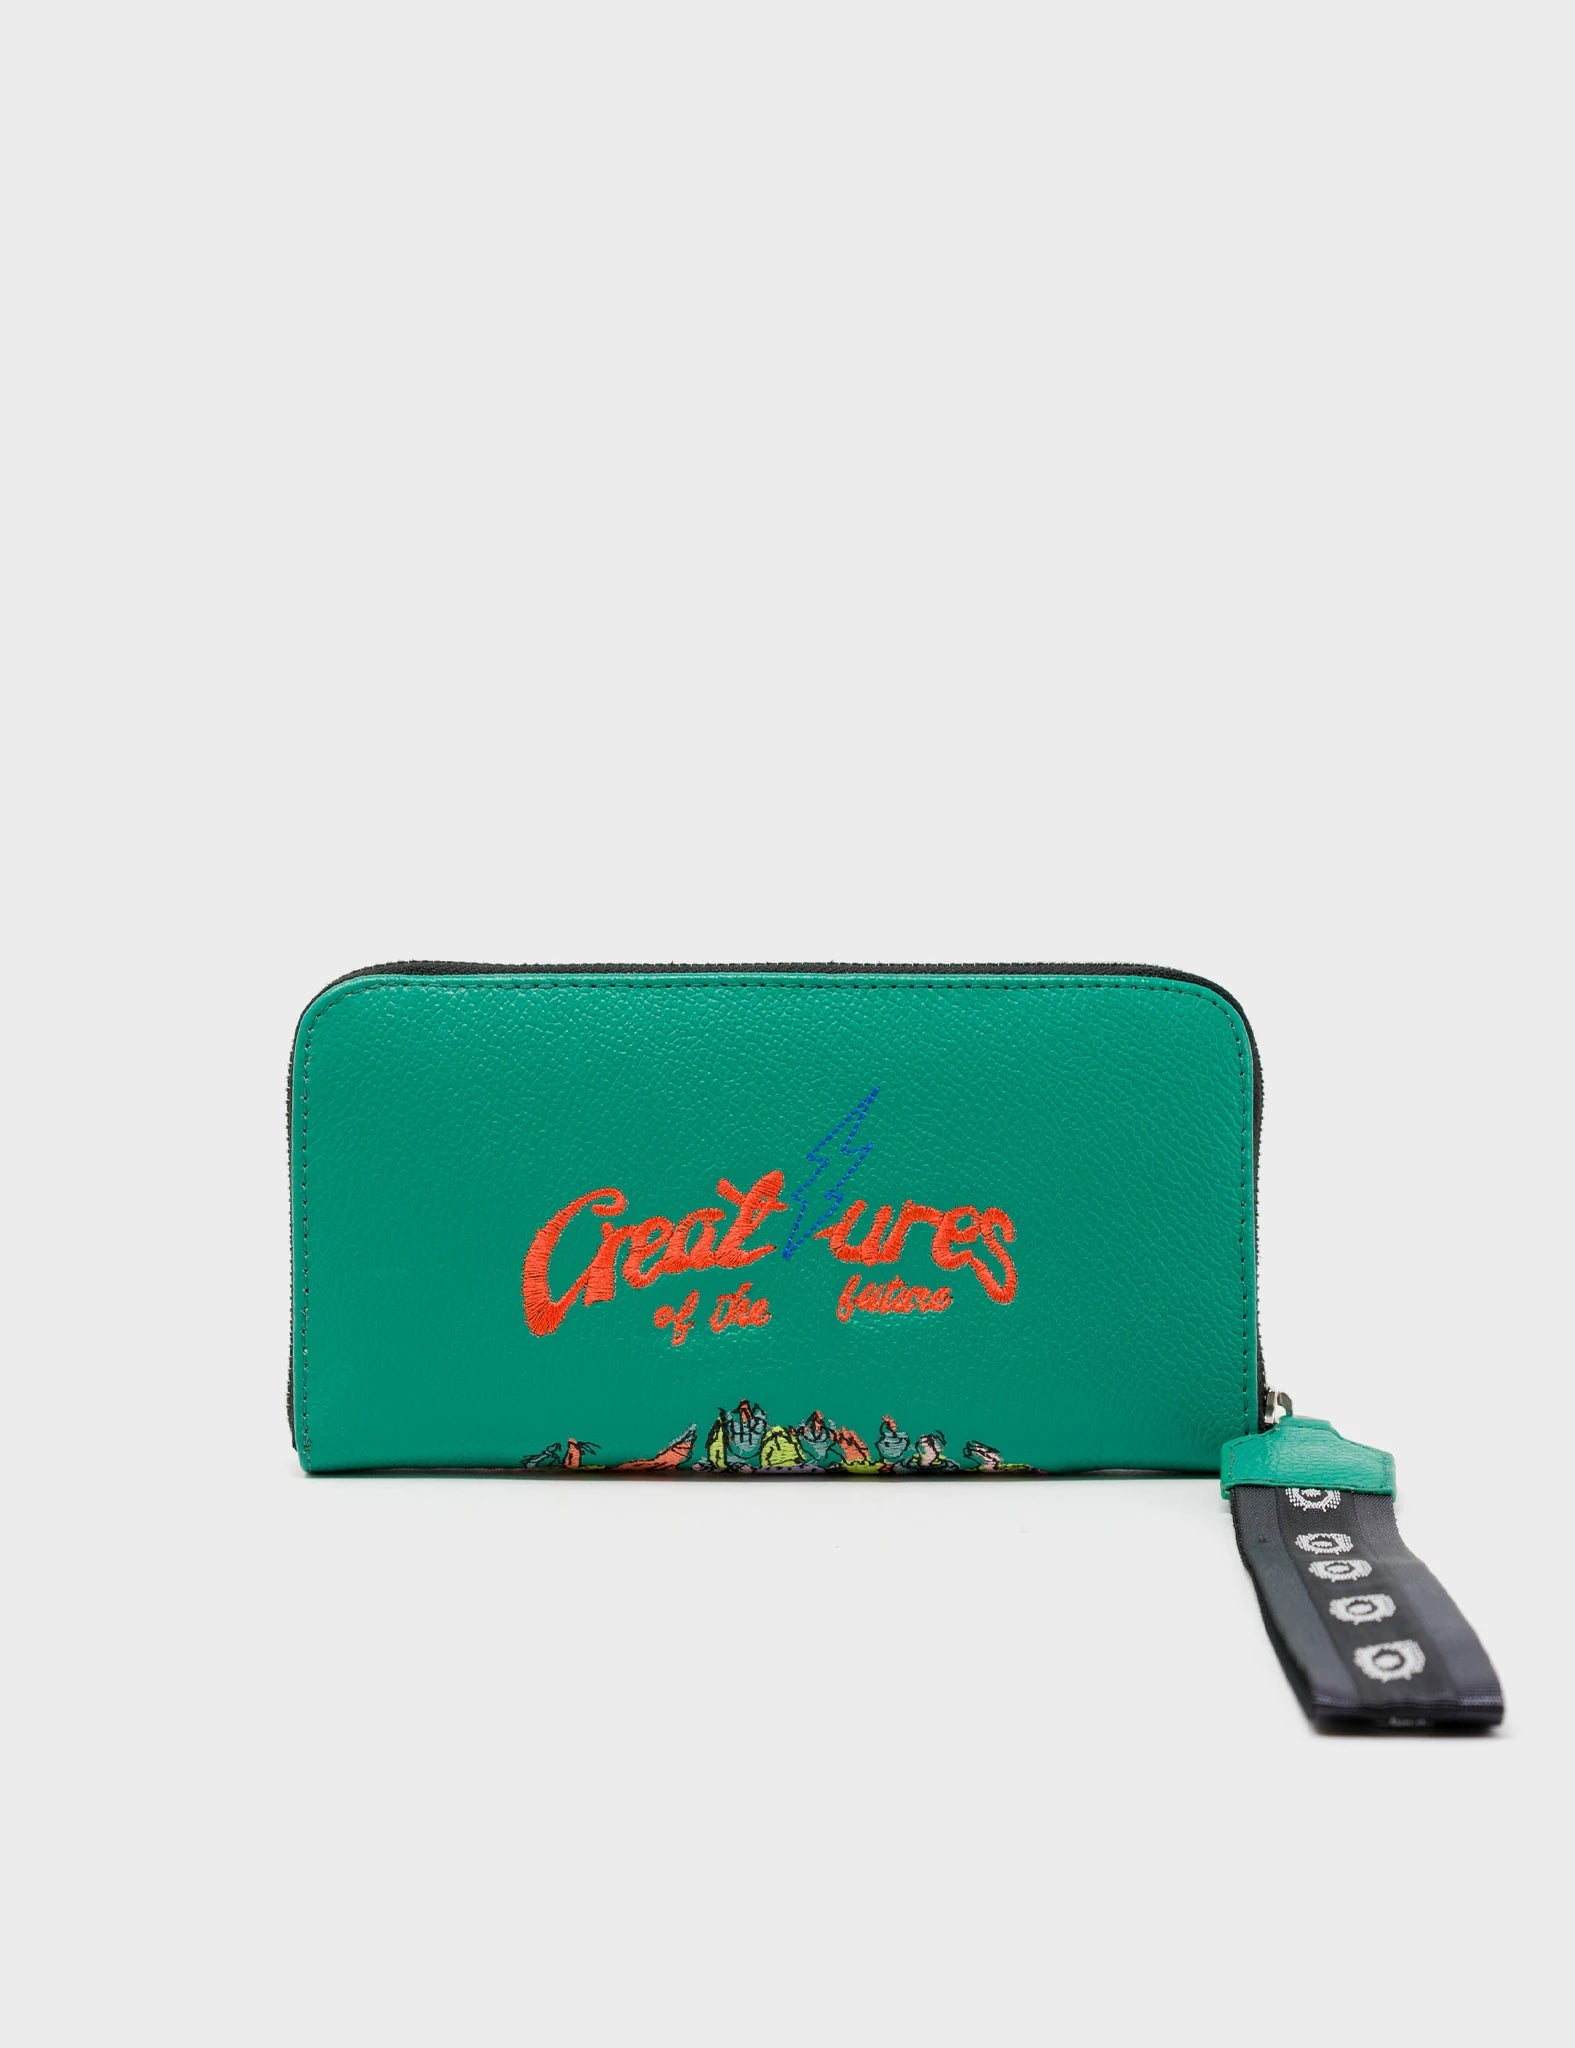 Francis Deep Green Leather Wallet -  Woodlands Embroidery - Back 